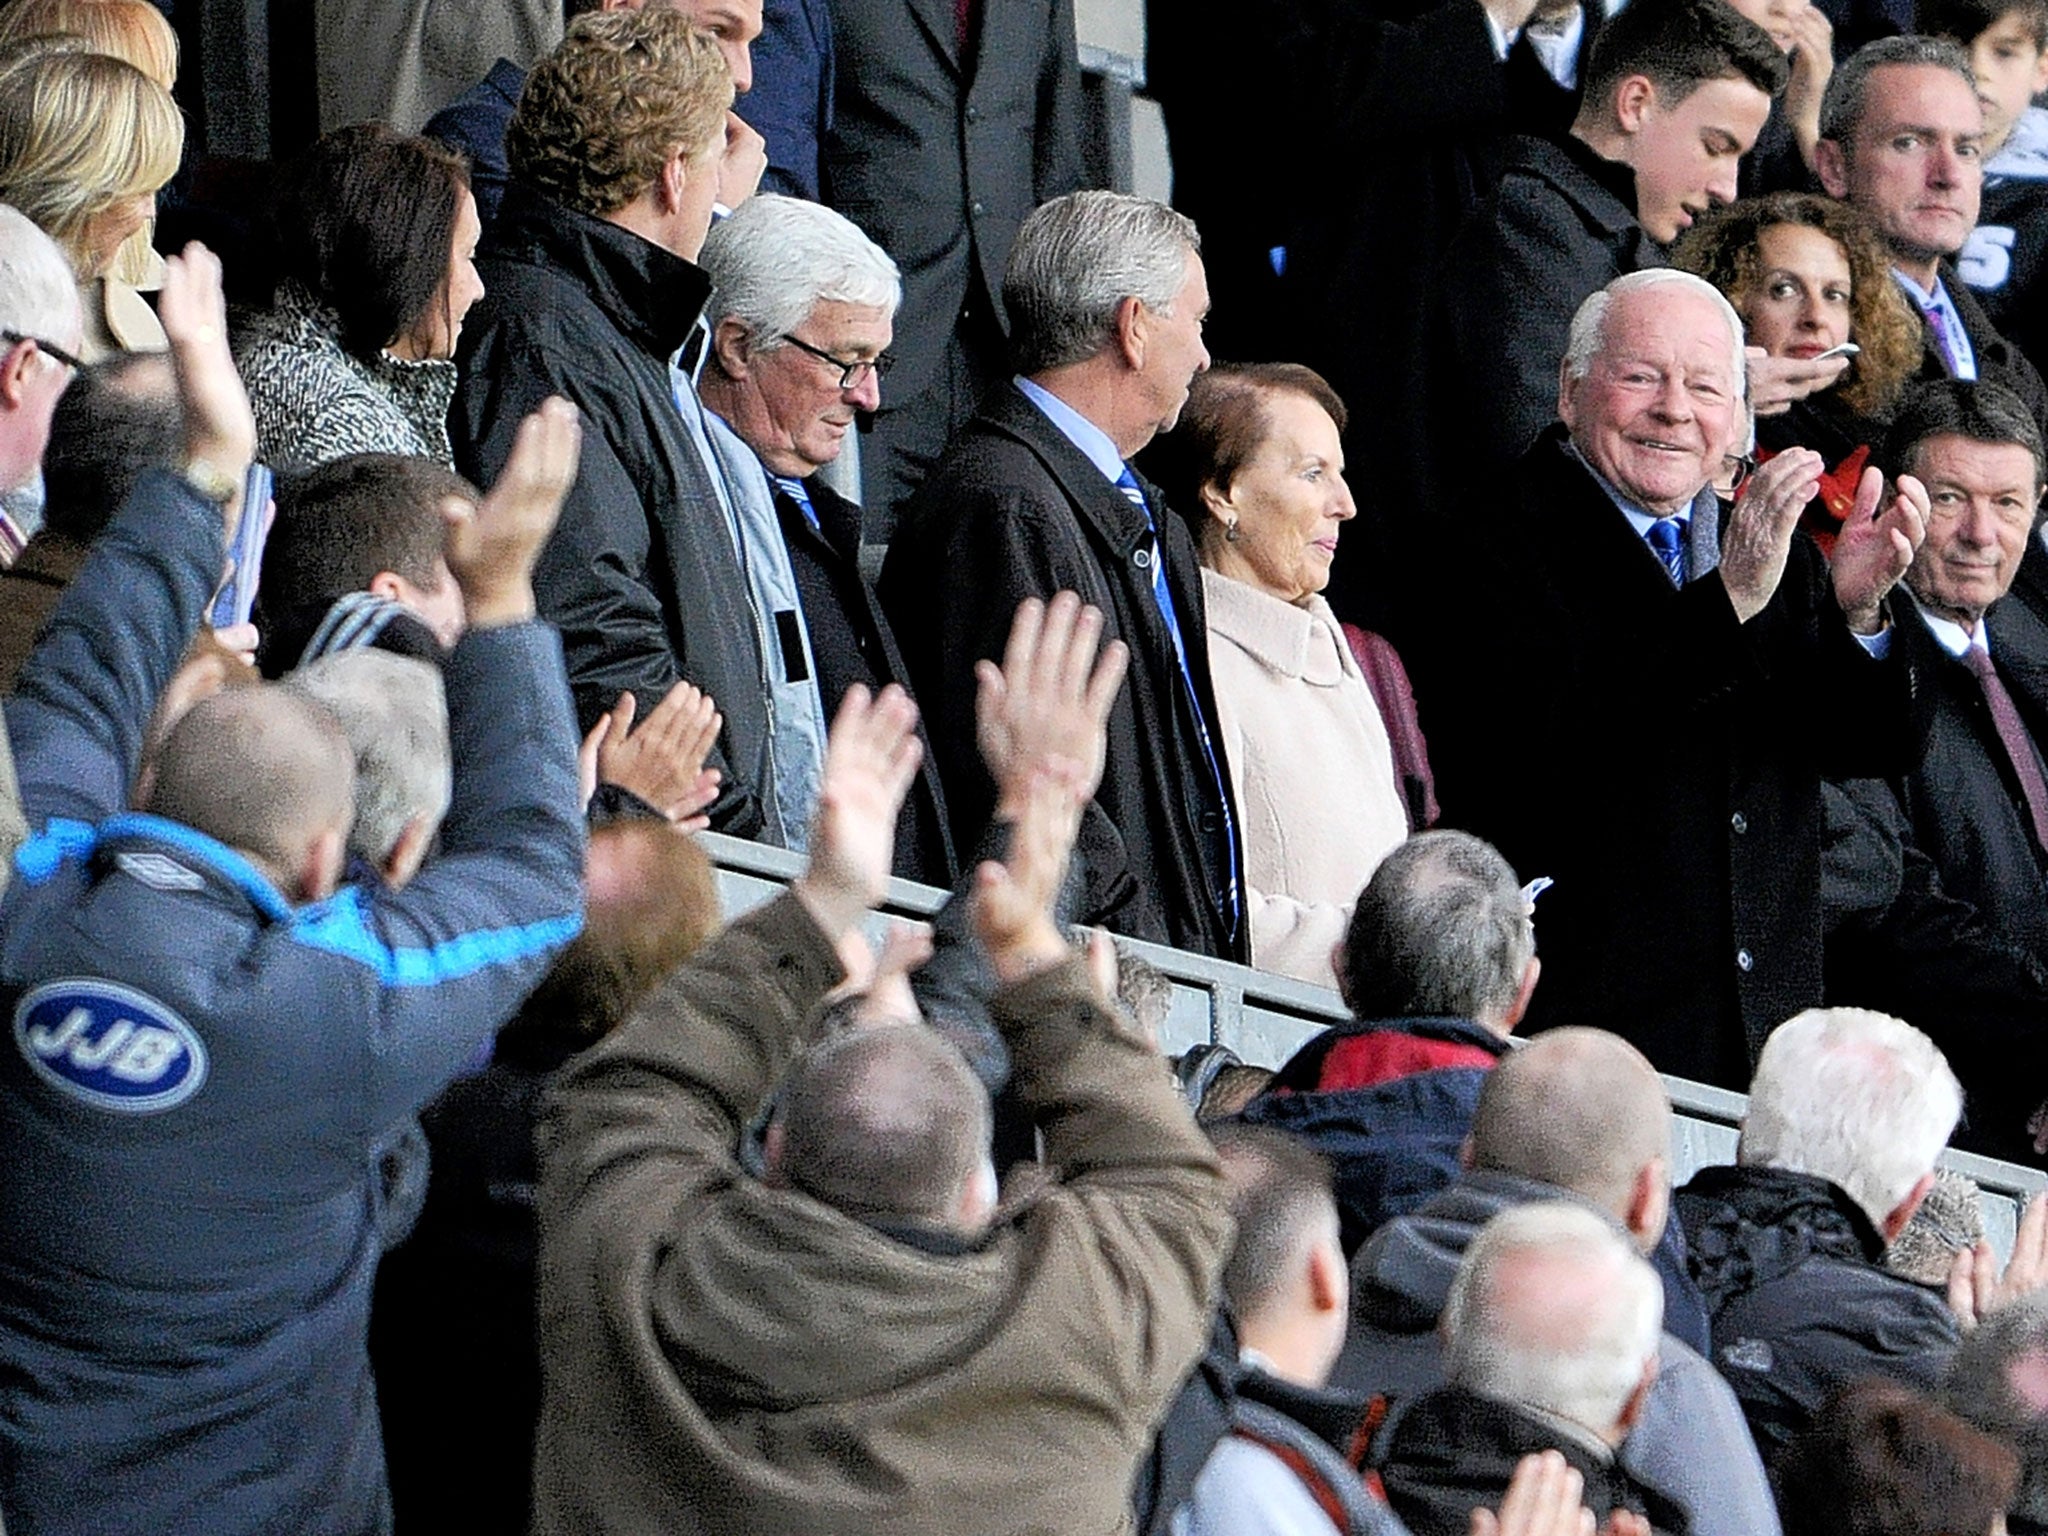 The Wigan Athletic chairman, Dave Whelan, returns the applause of fans as he takes his seat at the DW Stadium on Saturday